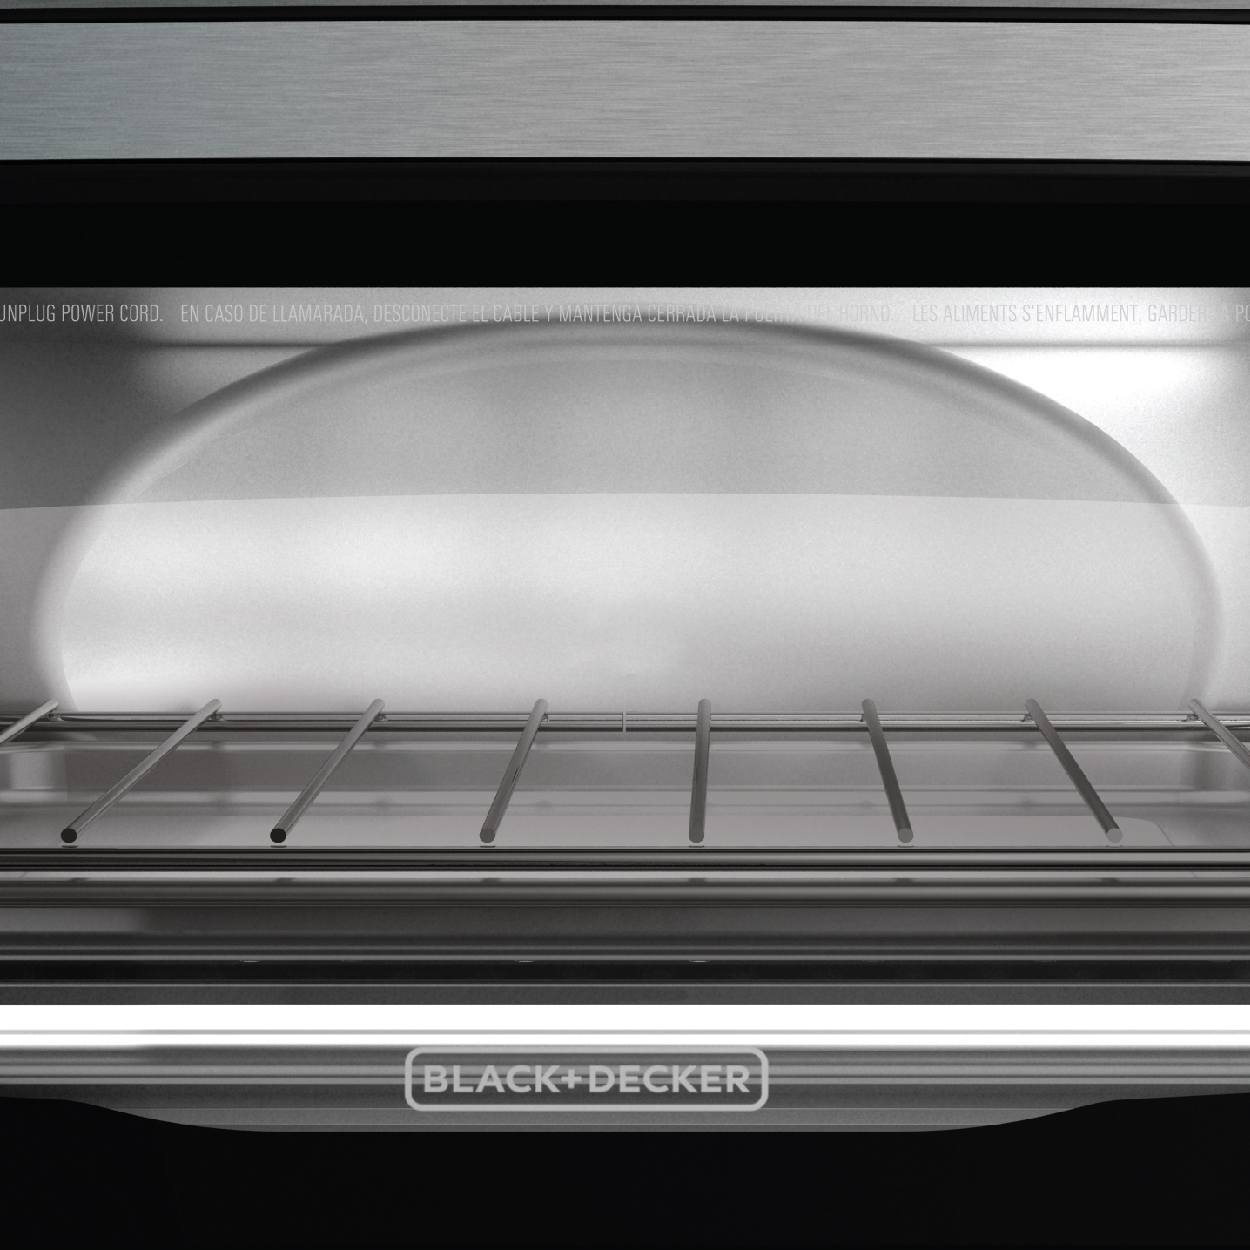 Black & Decker 4 Slice Stainless Steel Toaster Oven - image 3 of 12